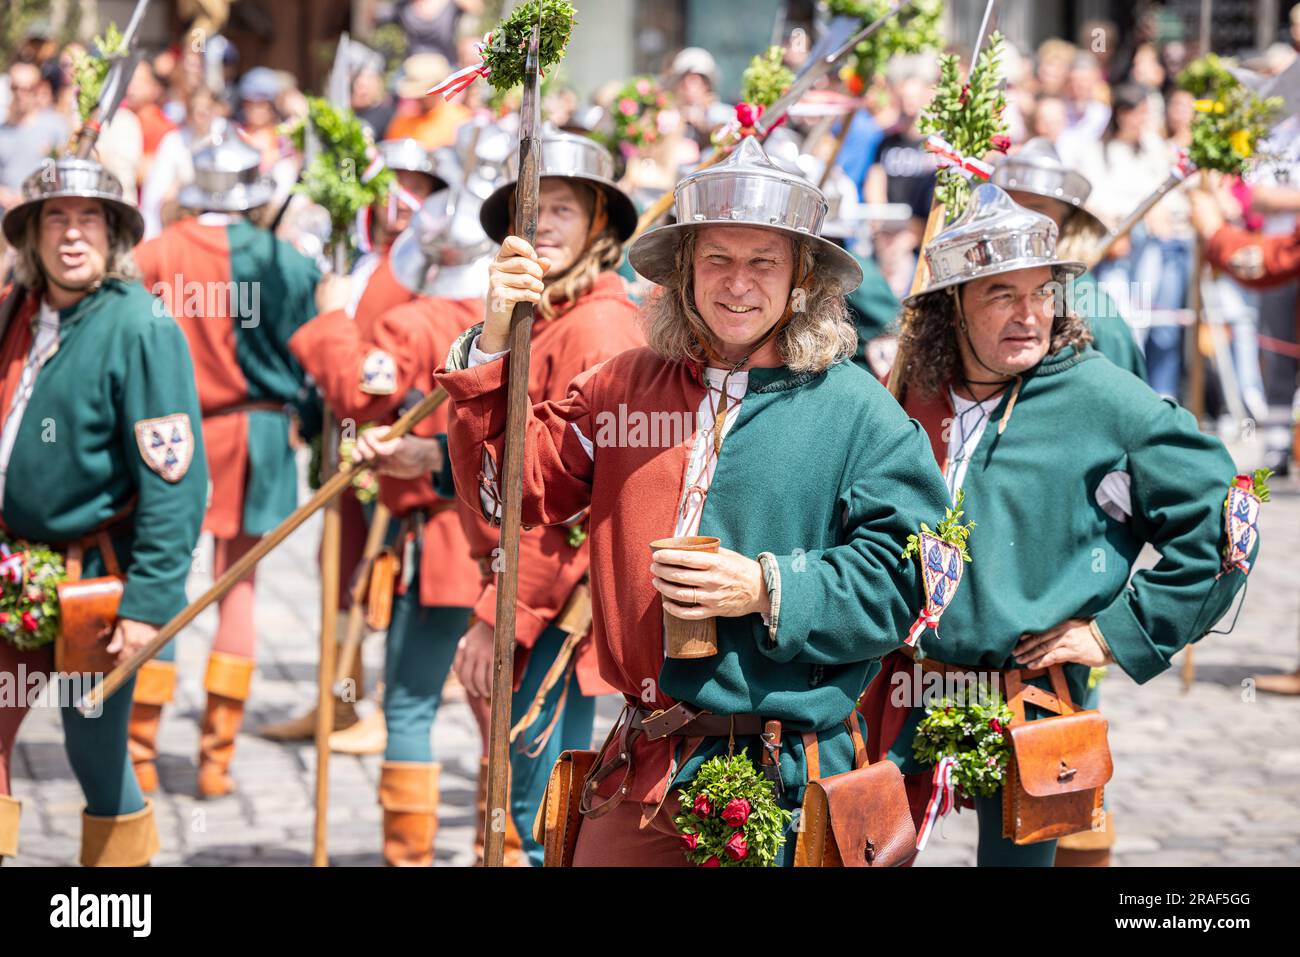 Landshut, GERMANY - July 2, 2023: The historical pageant 'Landshuter Hochzeit' celebrating the 1475 wedding of Hedwig and George. Participants of the Stock Photo